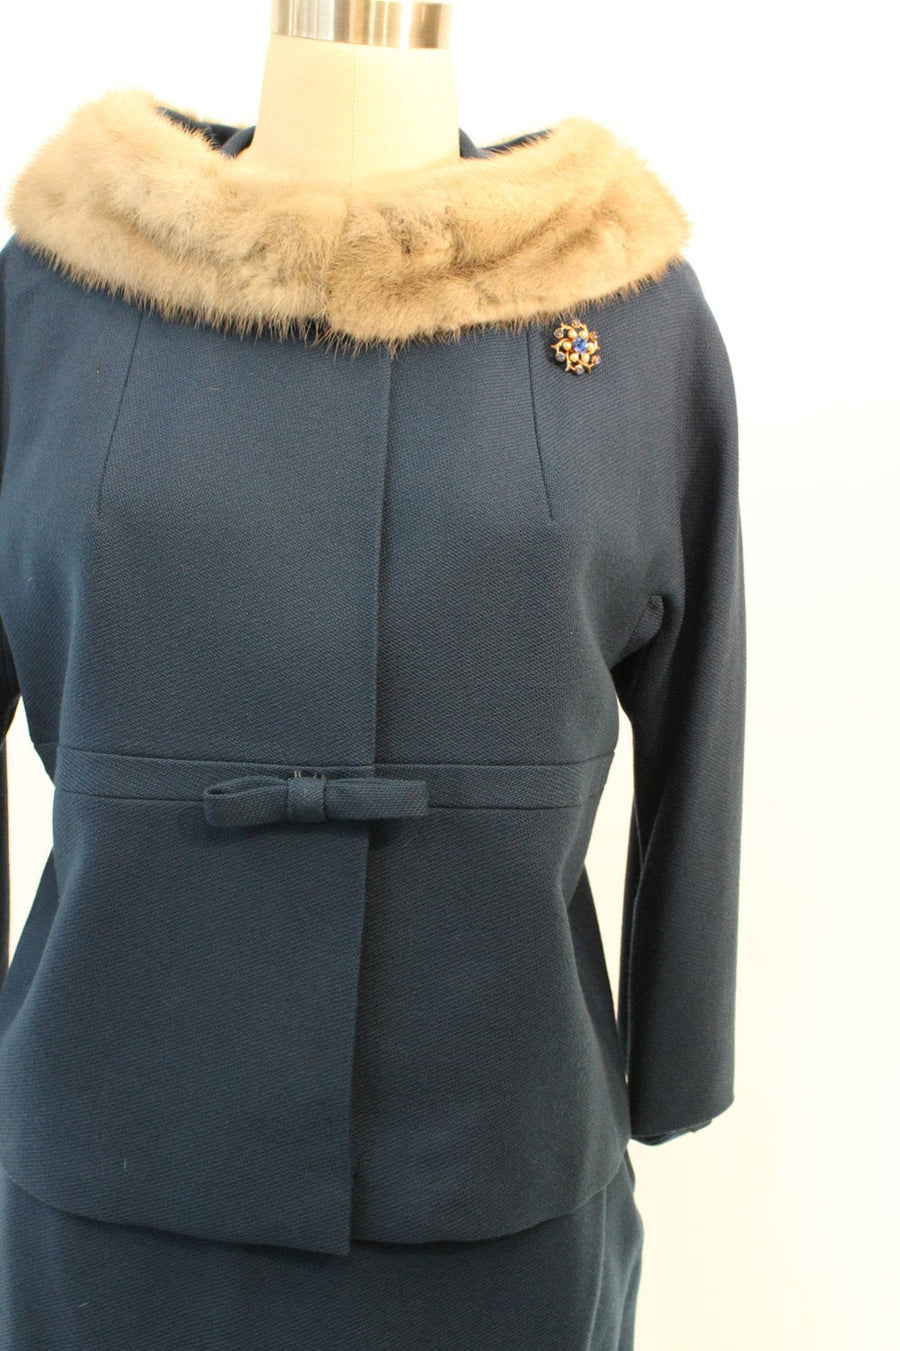 1960s mink collar suit small | vintage skirt and jacket